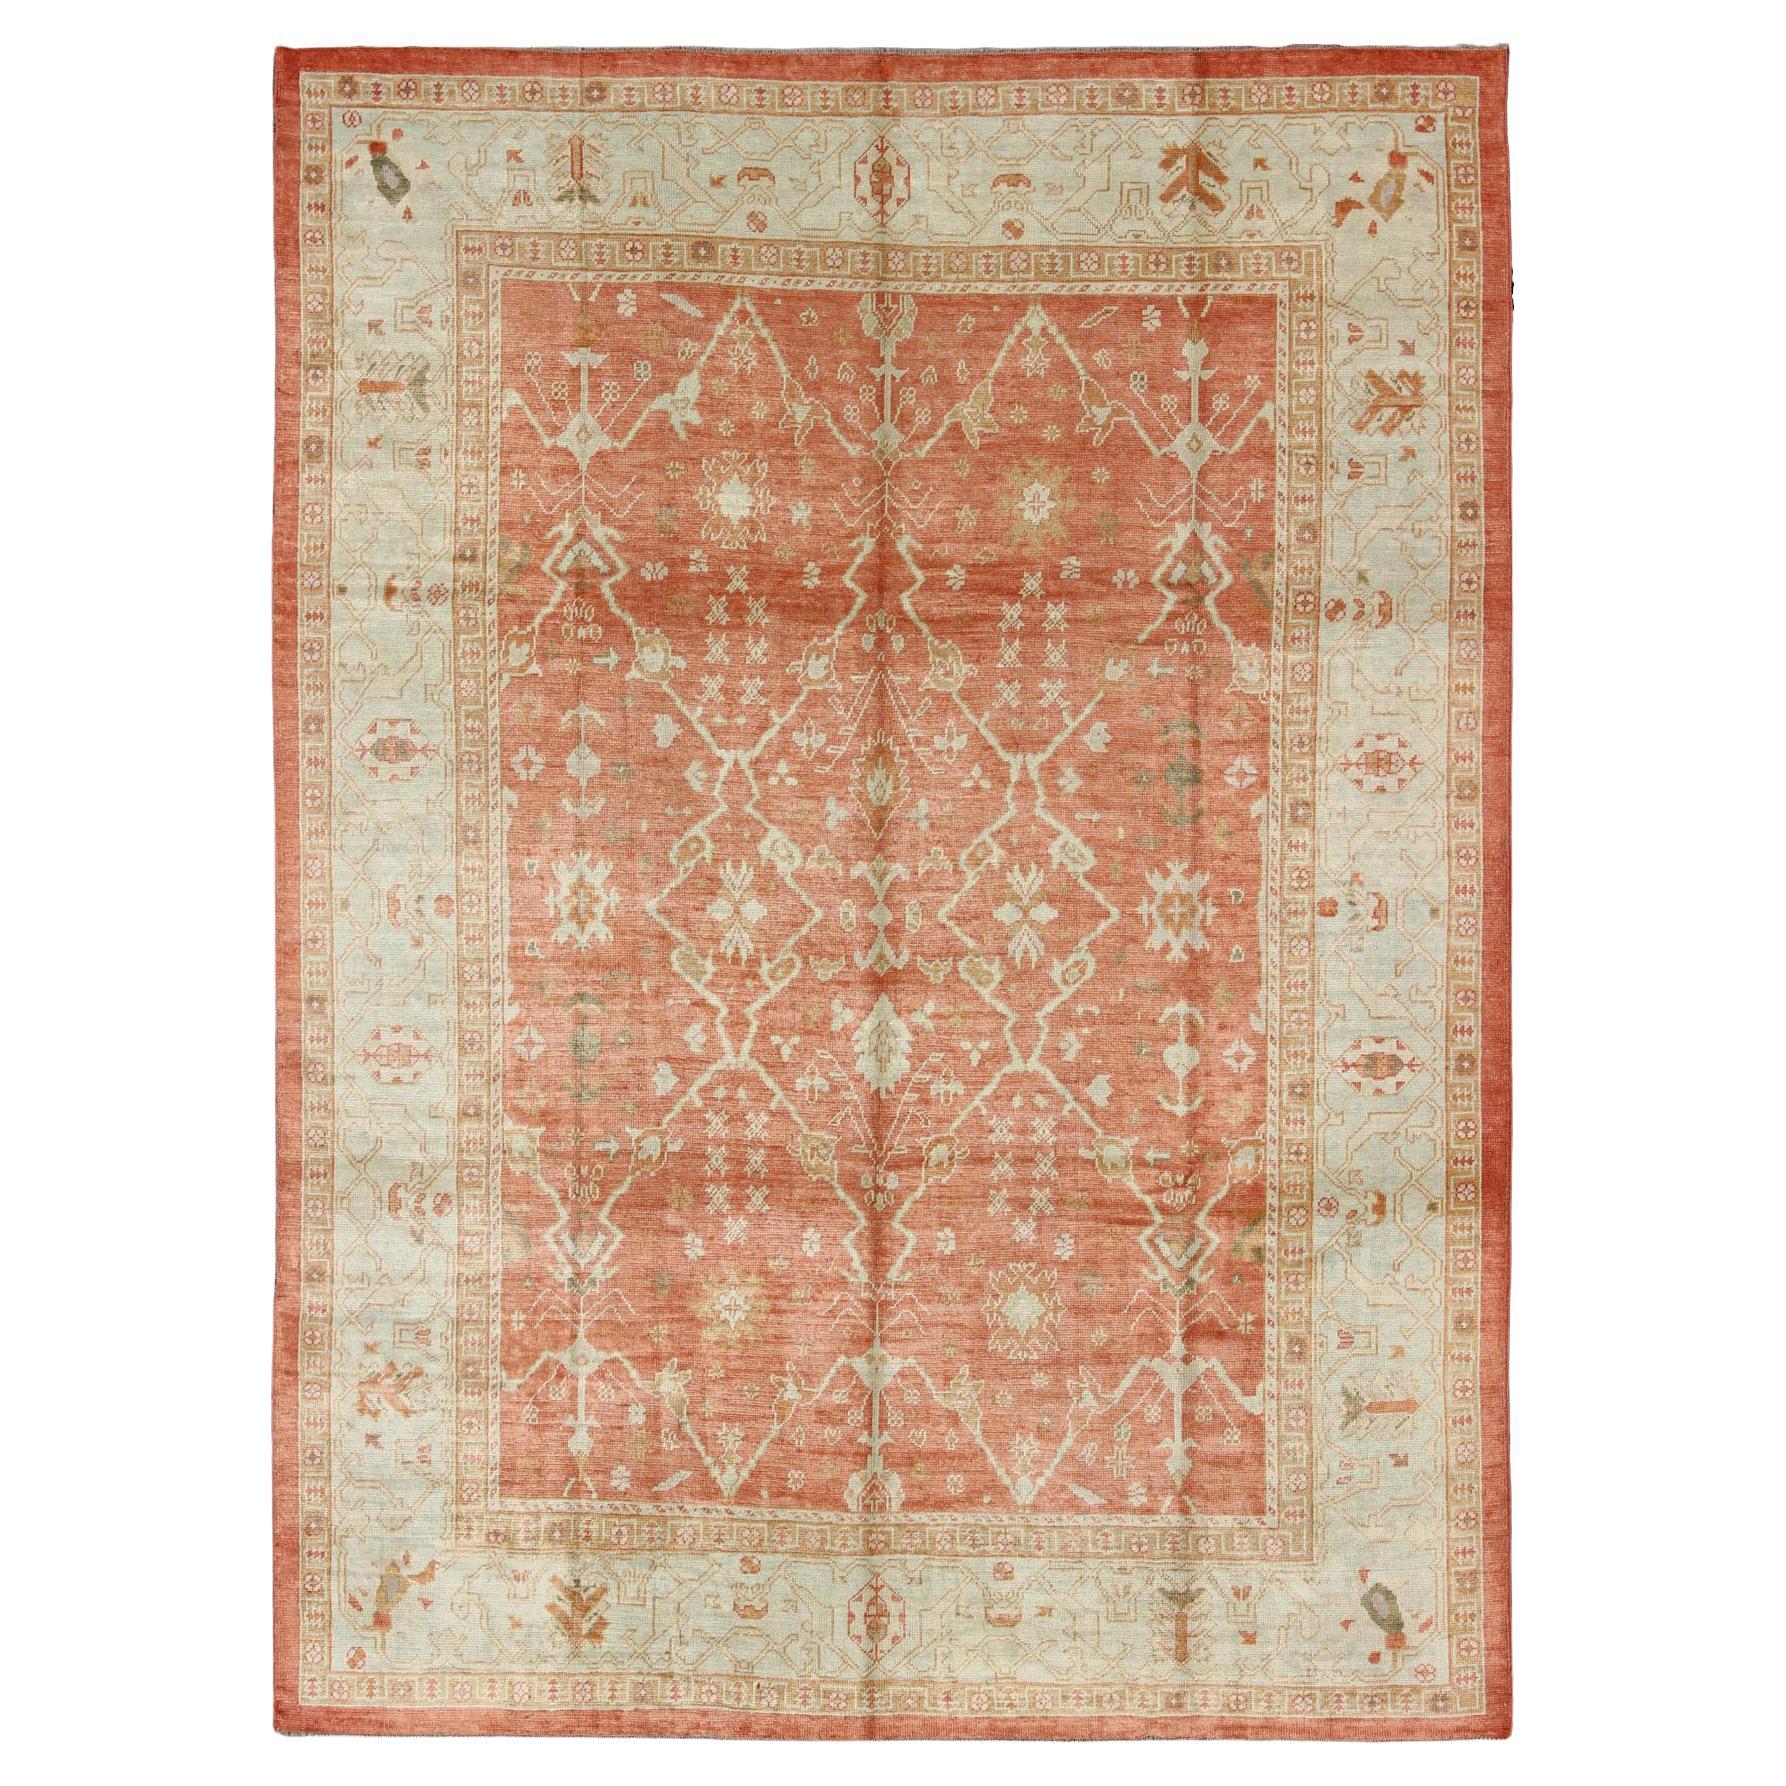 Turkish Oushak Rug with Angora Wool in Rust Orange, Green and Cream Tones For Sale